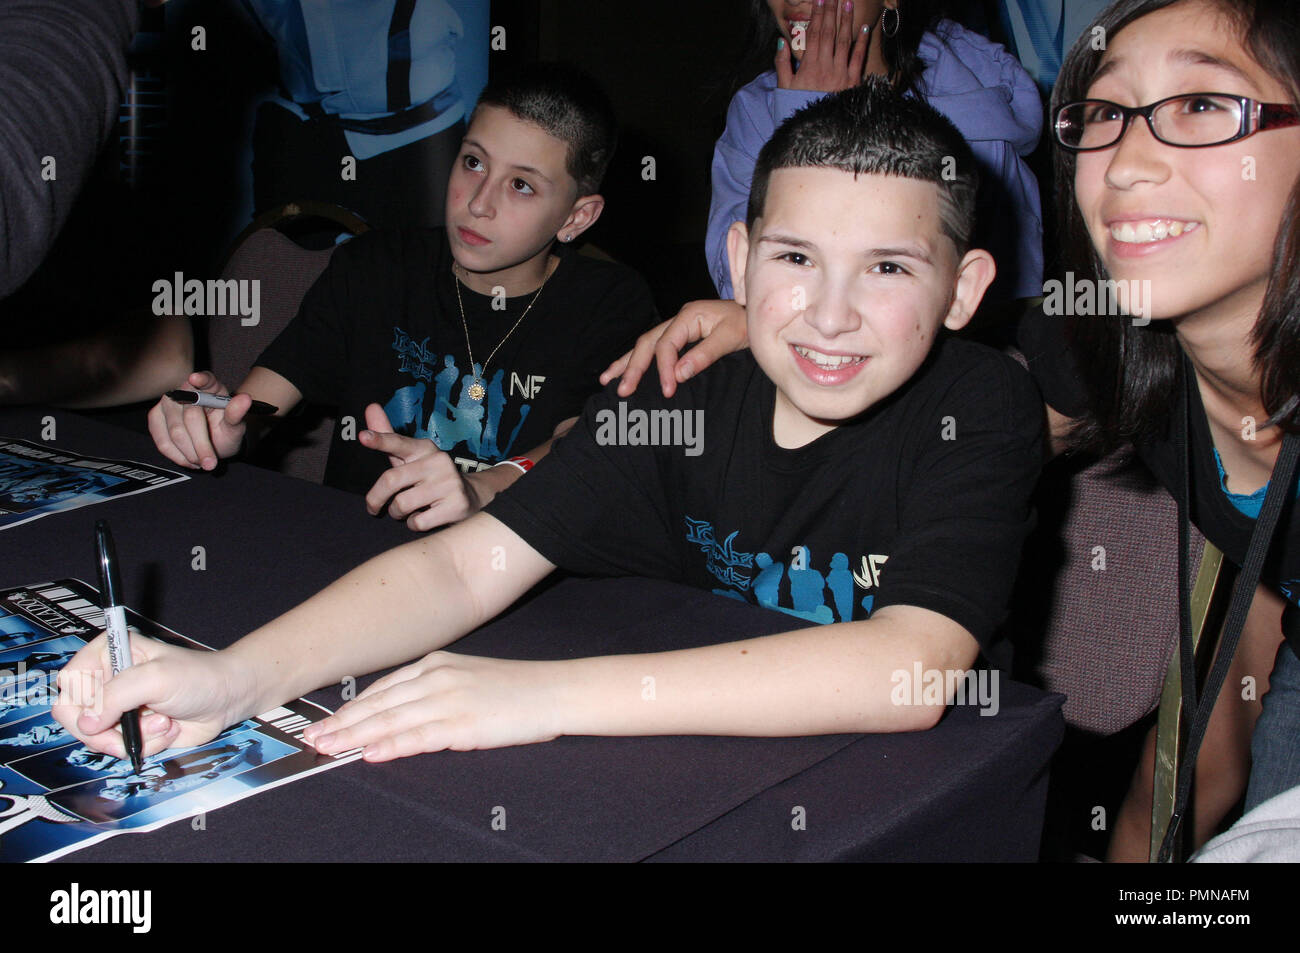 (l-r) Mike Fusco and Louis Dipippa of the Iconic Boyz at the NRG Dance Project Tour featuring the Iconic Boyz meet and greet and show held at the Woodlake Hotel in Sacramento, Ca on Friday, February 24, 2012. Photo by Peter Gonzaga Pacific Rim Photo Press/ PictureLux Stock Photo